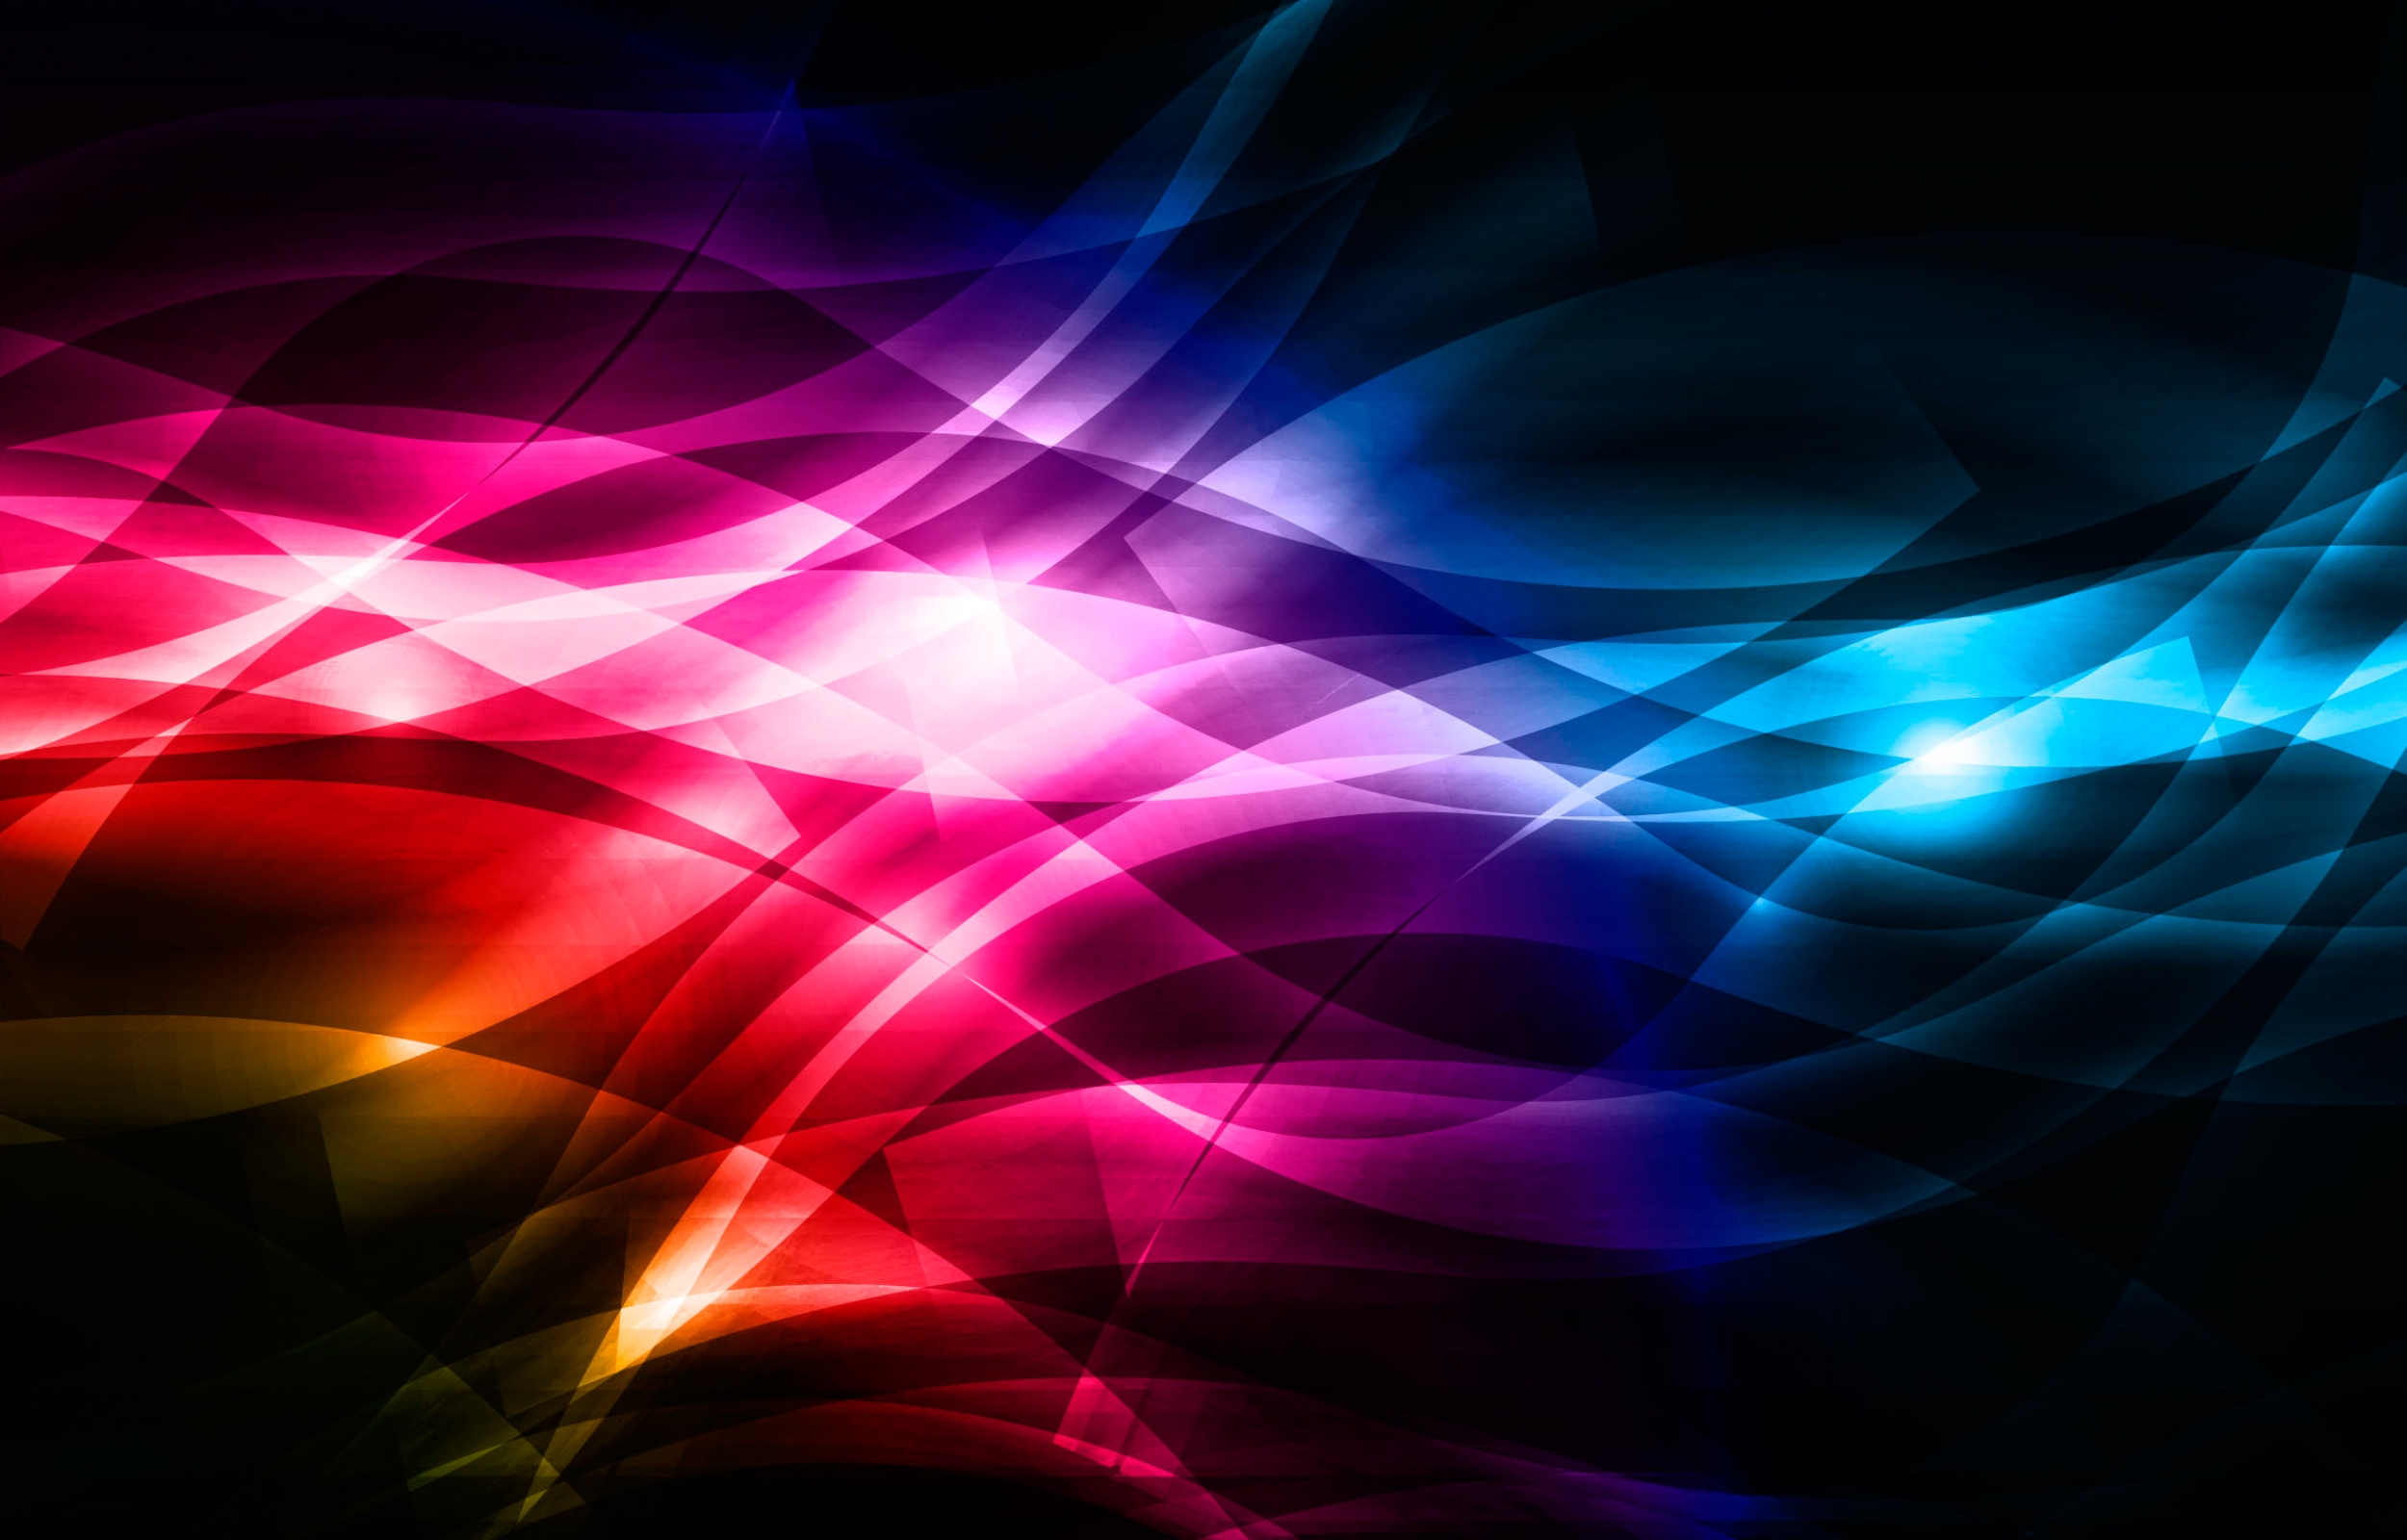 Abstract Colorful Background Wallpapers - 2500x1600 - 1530133